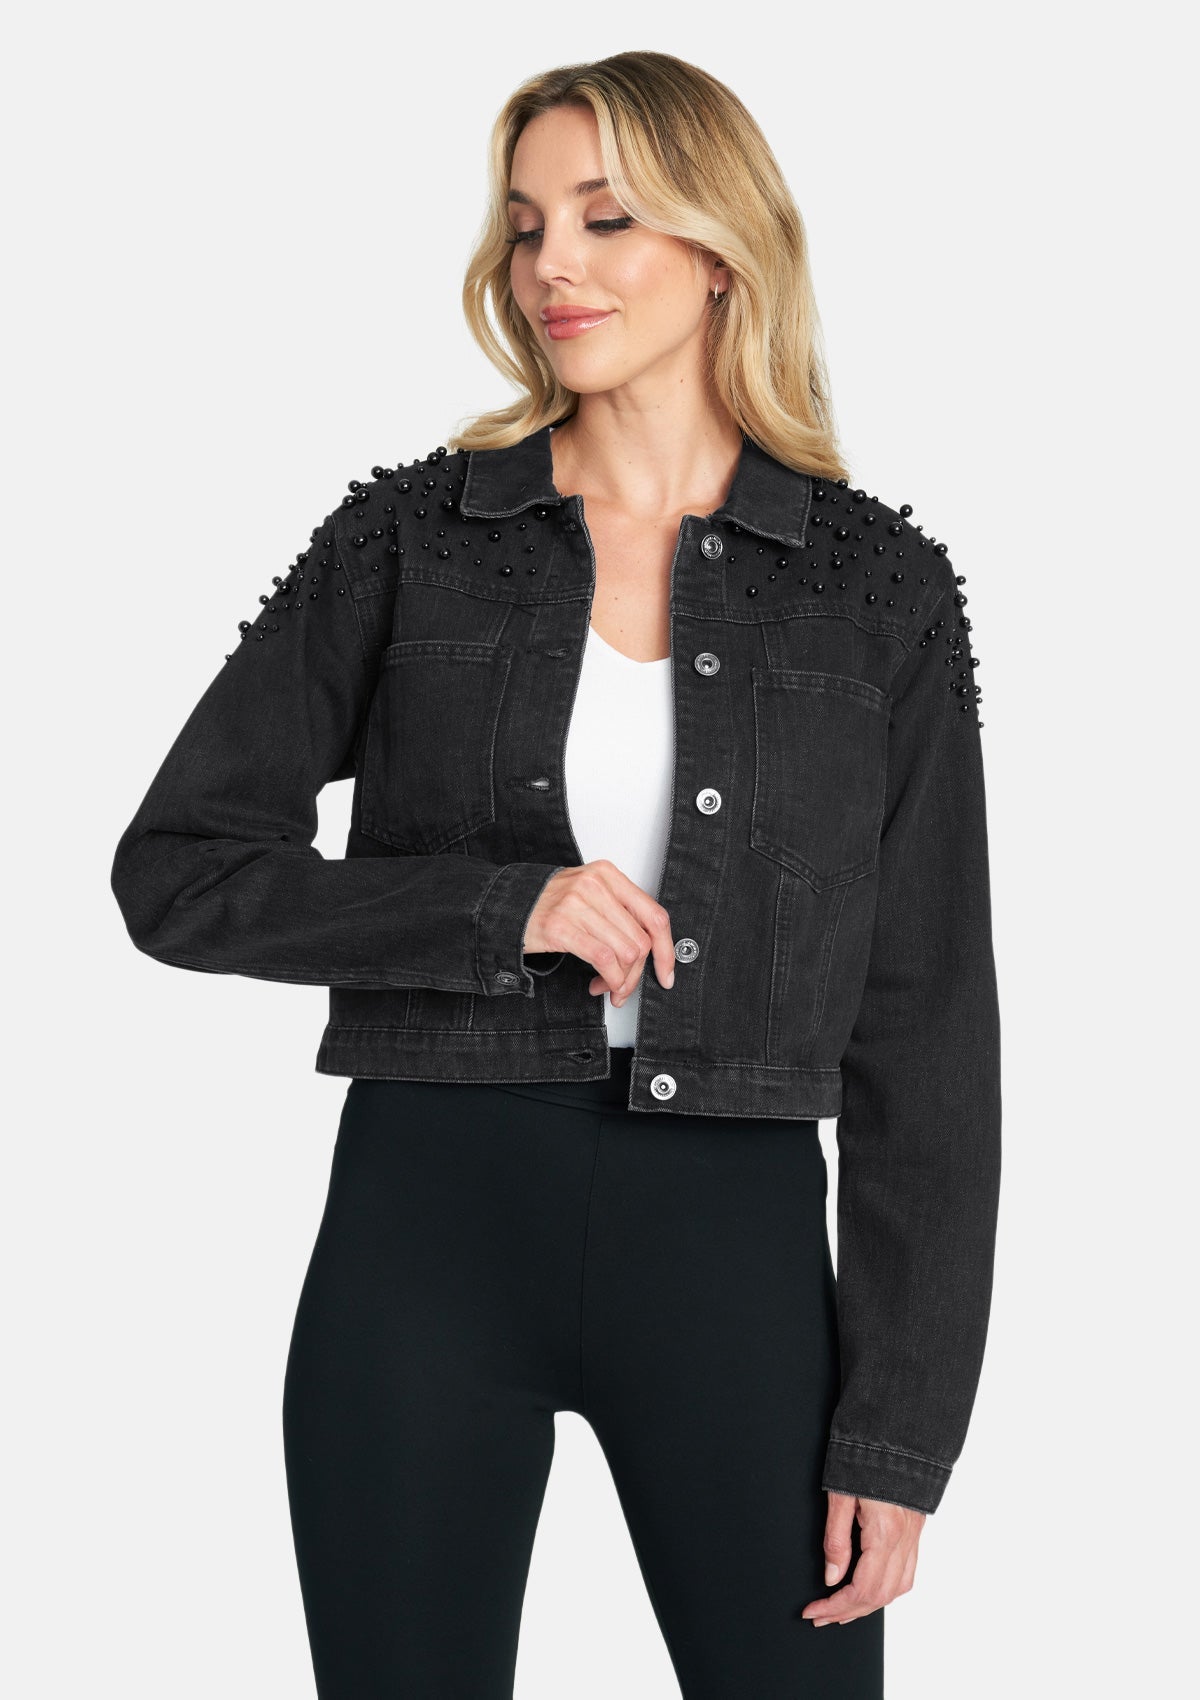 Alloy Apparel Tall Ava Embellished Denim Jacket for Women in Black Size L | Cotton